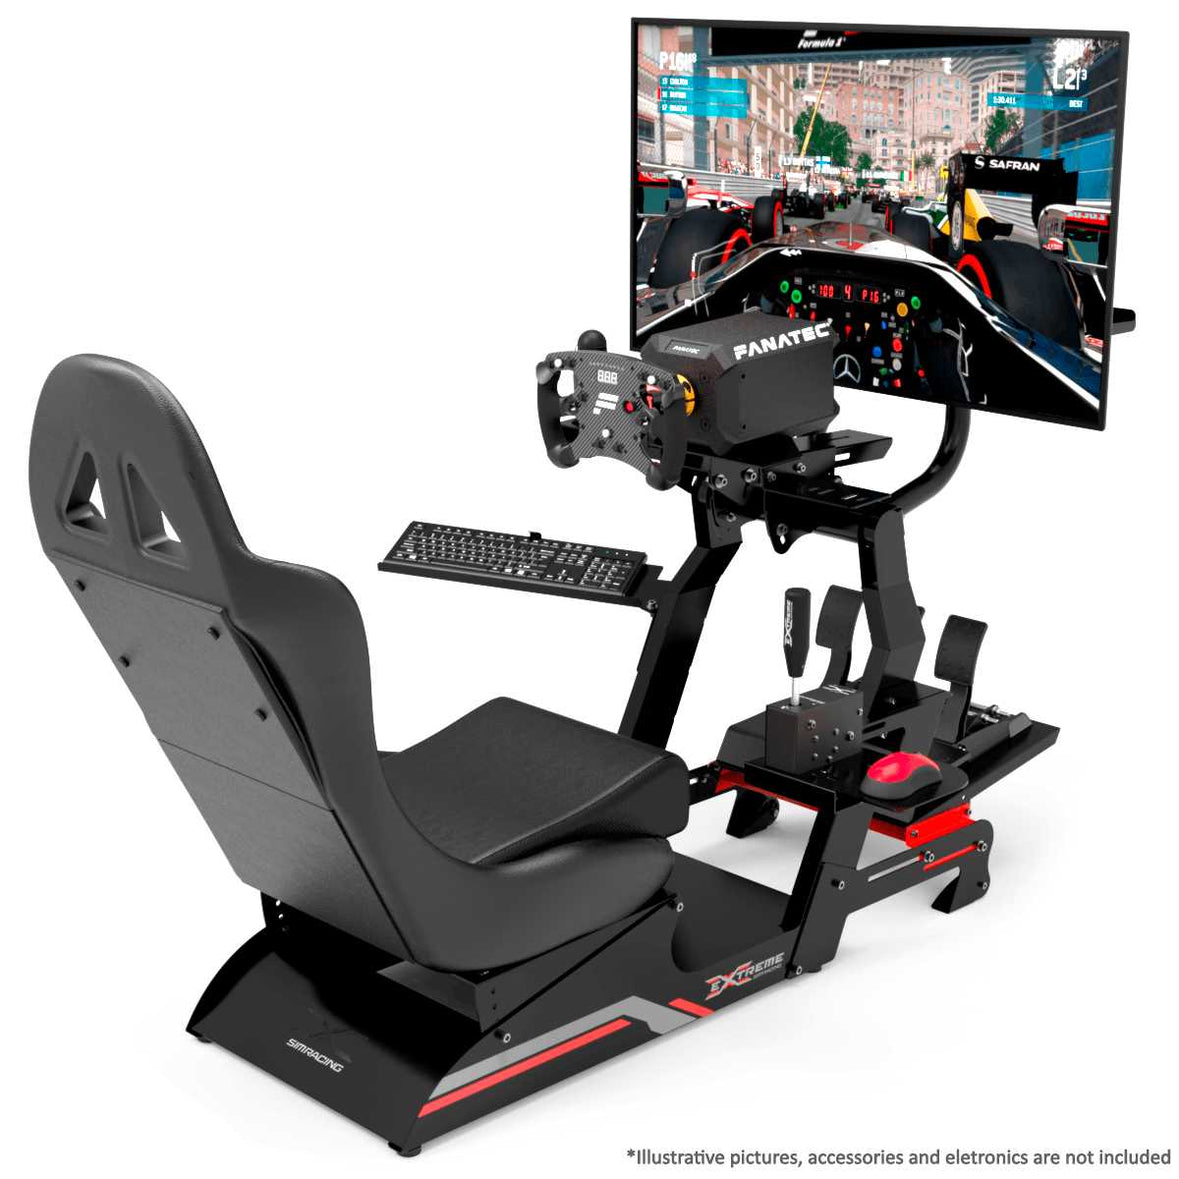  Playseat Formula Sim Racing Cockpit, High Performance Racing  Simulator Cockpit for All Steering Wheels, Pedals and All Consoles, for  Authentic F1 Racing, Fully Adjustable